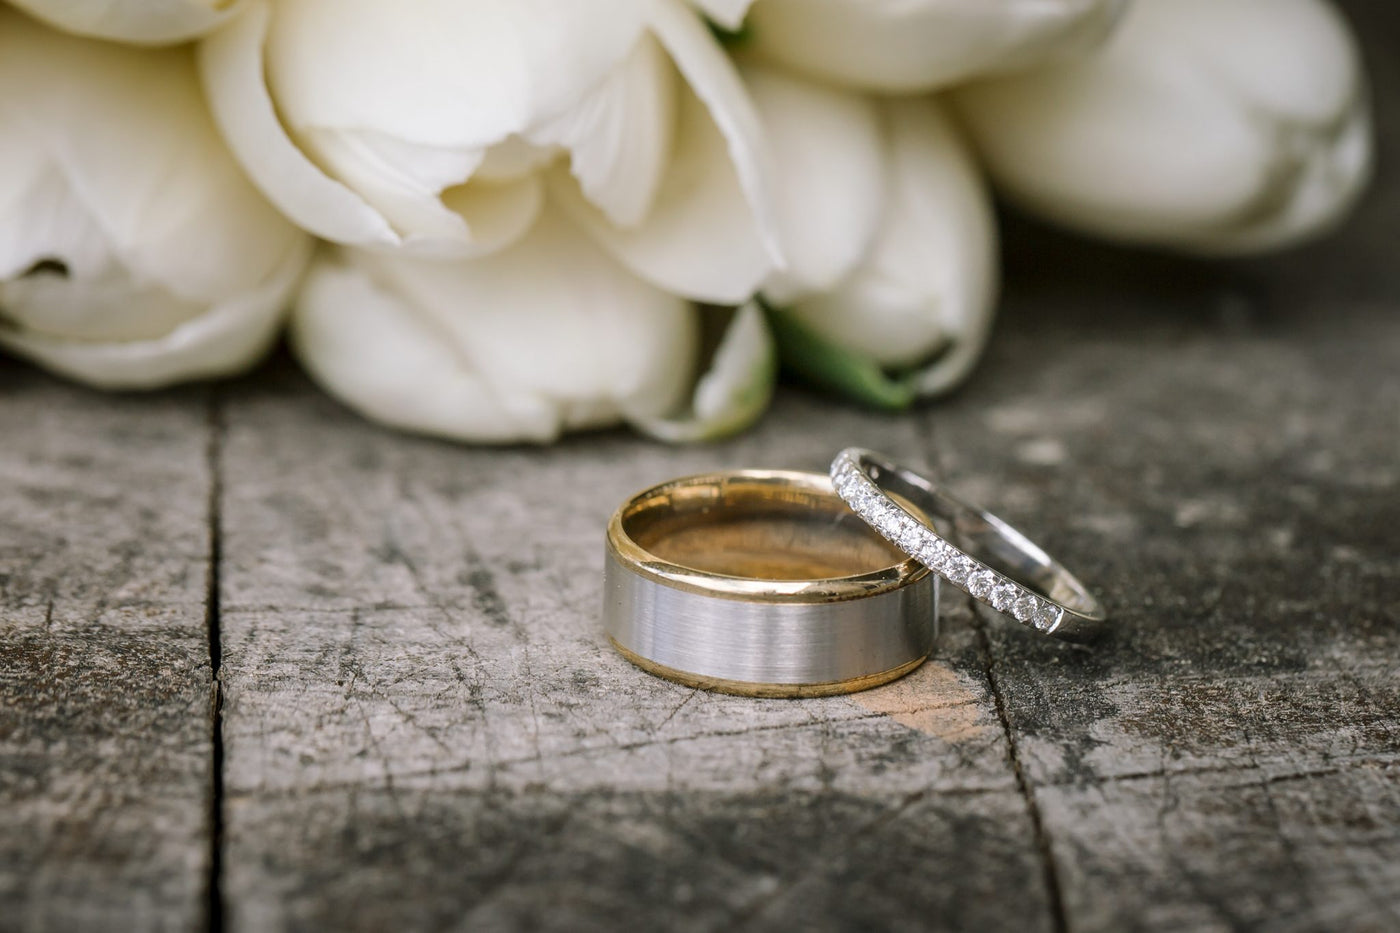 Matching Meteorite Wedding Rings with Polished Gold | Jewelry by Johan -  Jewelry by Johan